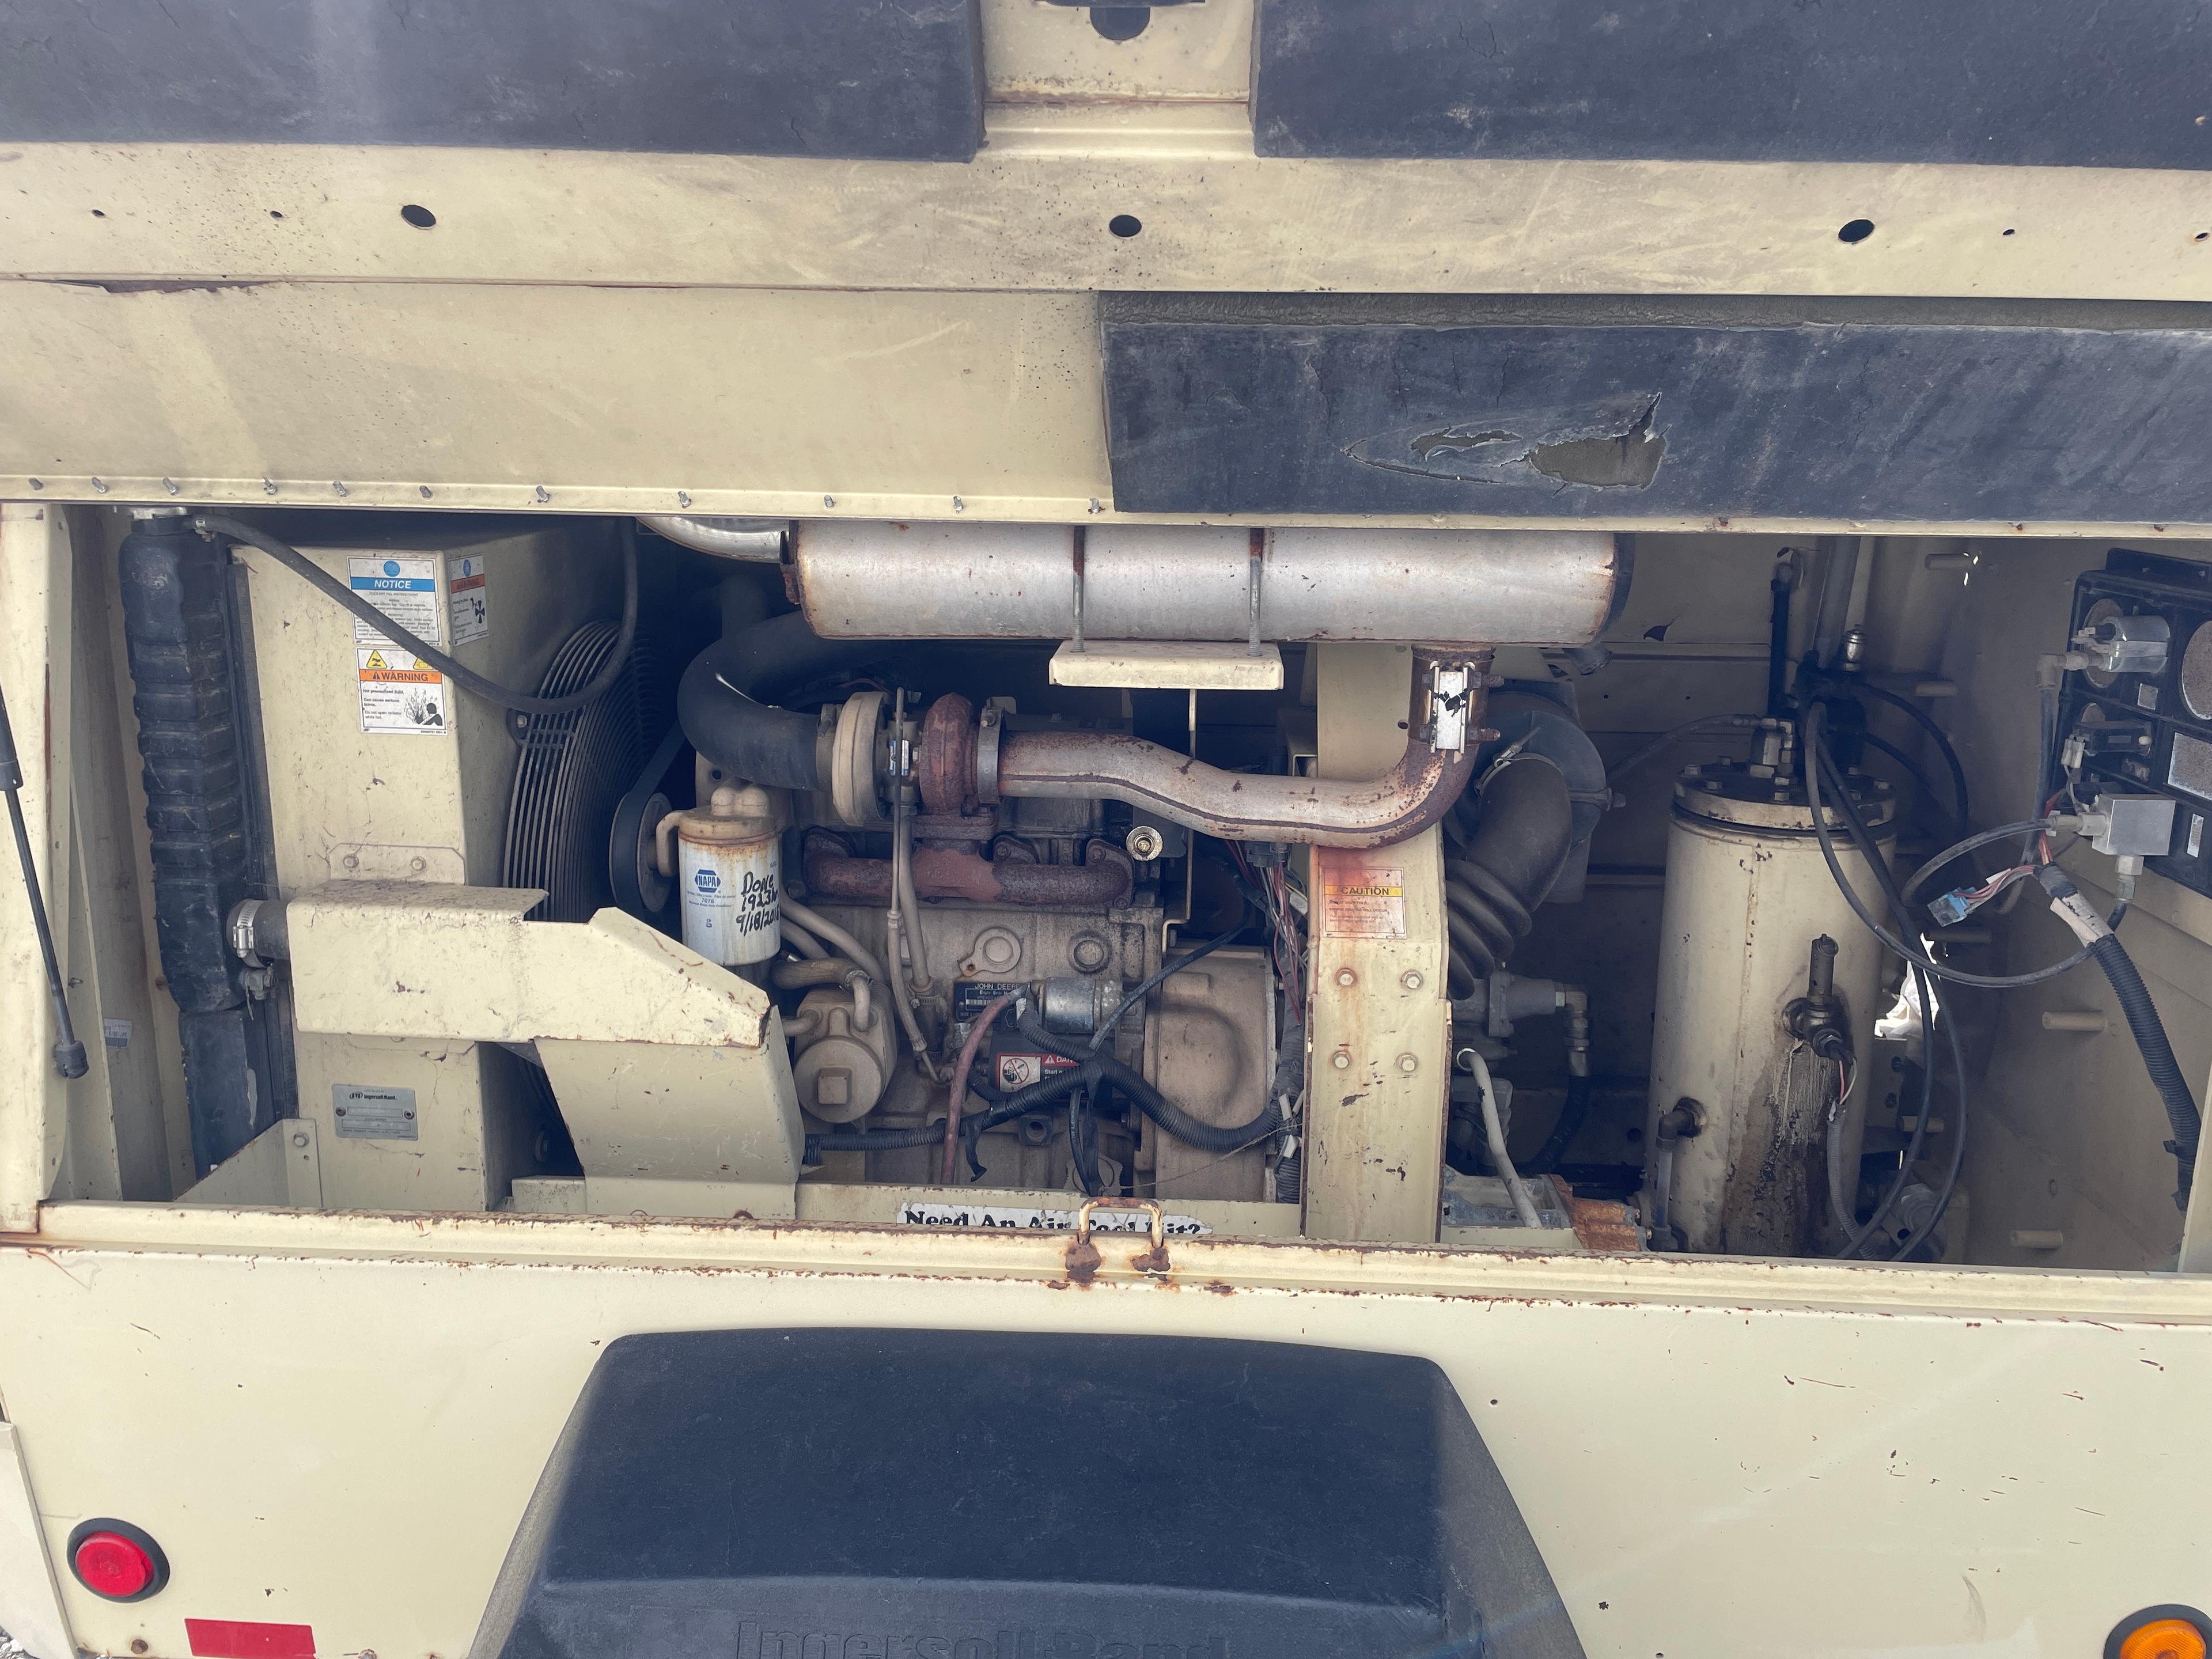 2006 Ingersoll Rand 185 Towable Air Compressor